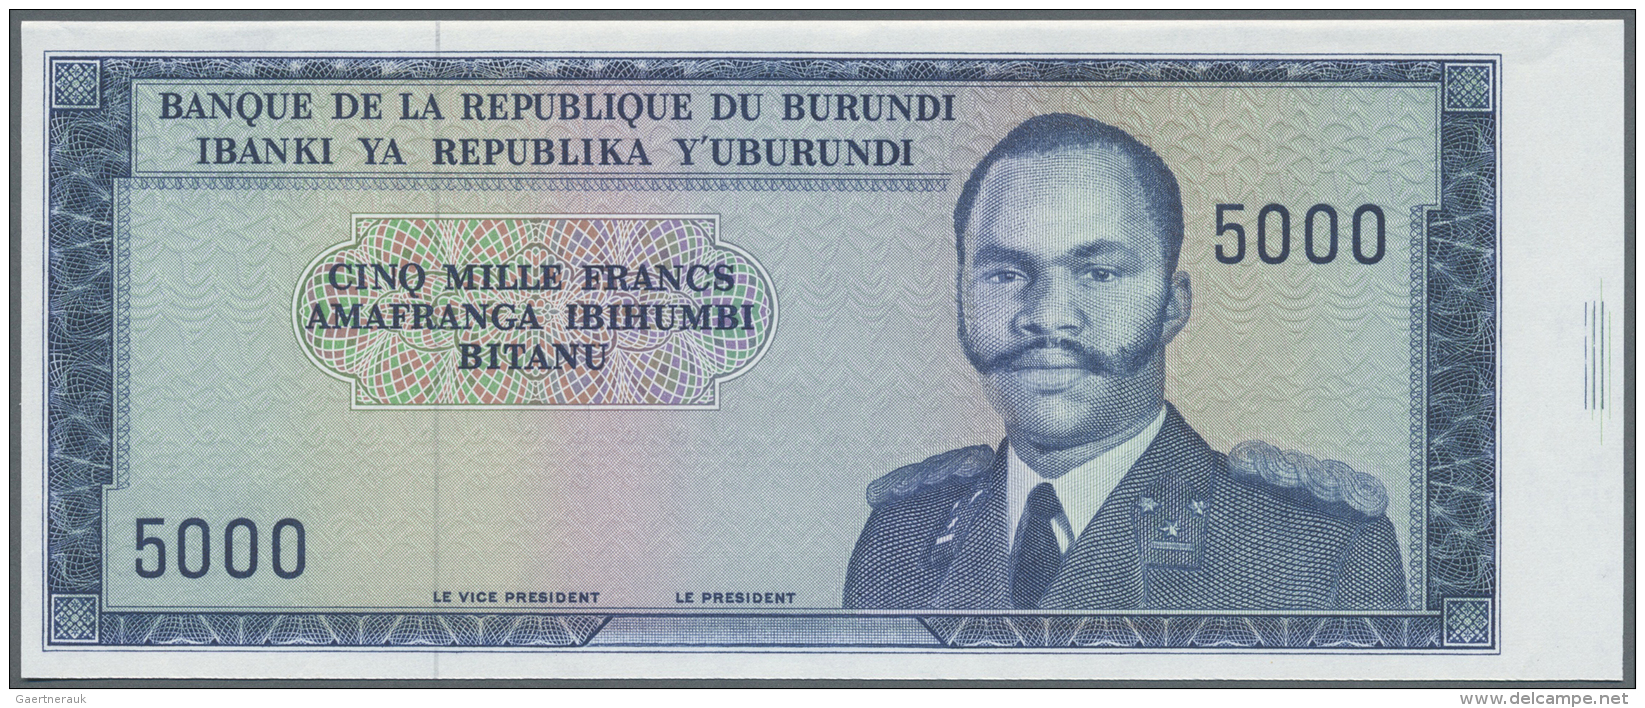 Burundi: Set Of 2 Progressive Proofs Of 5000 Francs ND P. 26a(p). The First Proof Has A Complete Printed Front And Back - Burundi